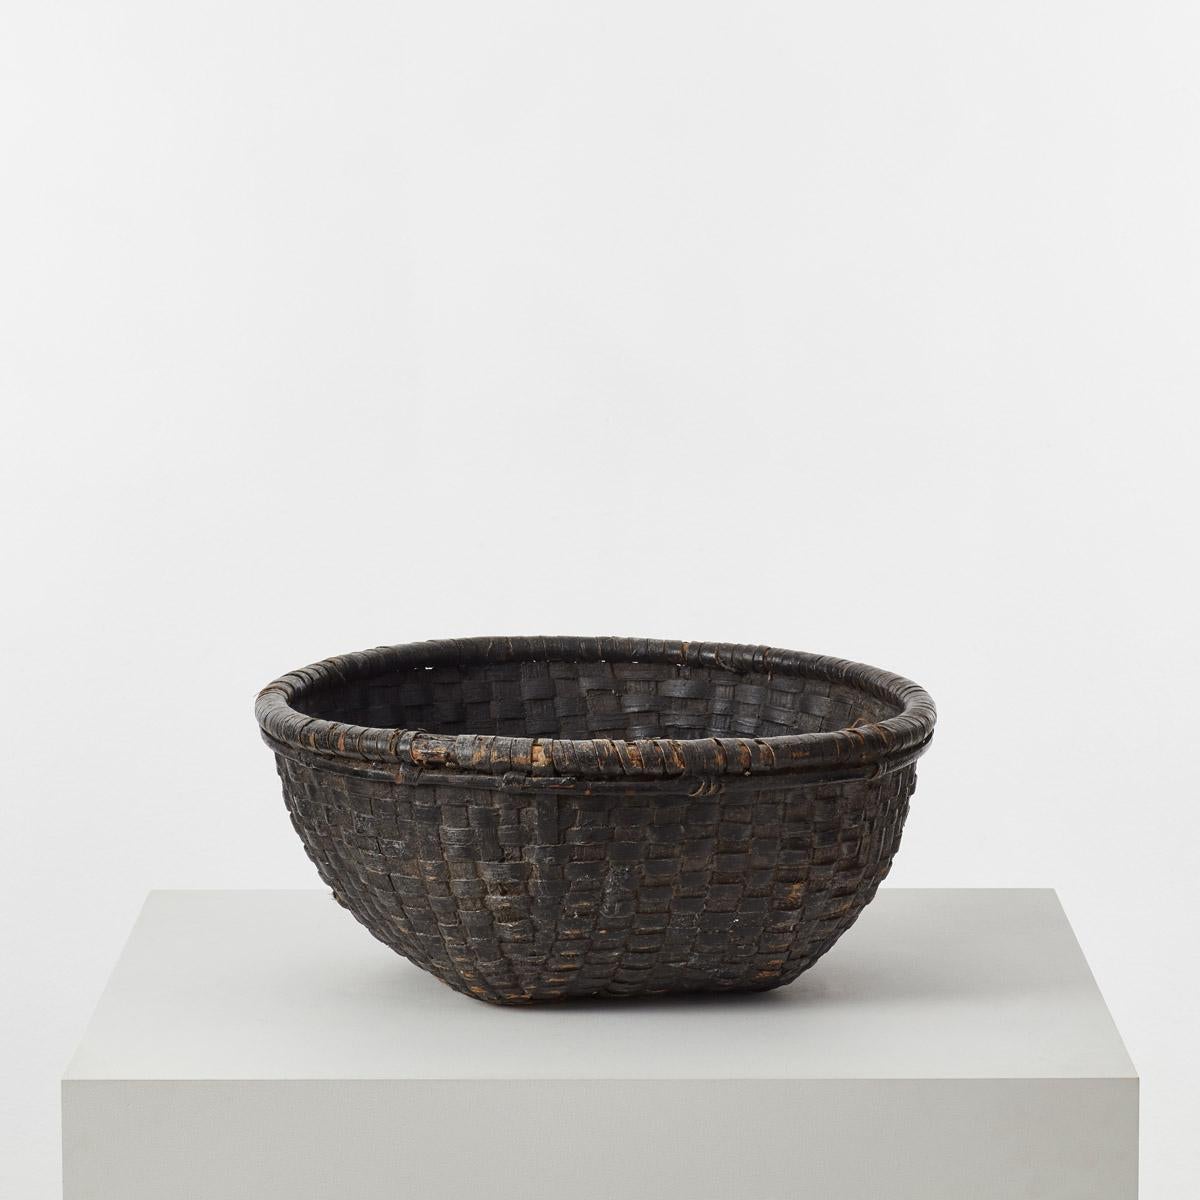 A well-constructed folk art antique basket from Japan, makes for an ideal piece of household storage or fruit basket. Possibly woven from willow grain, bark or bamboo, this wabi-sabi vessel is tightly bound to hold small grains like rice, as well as